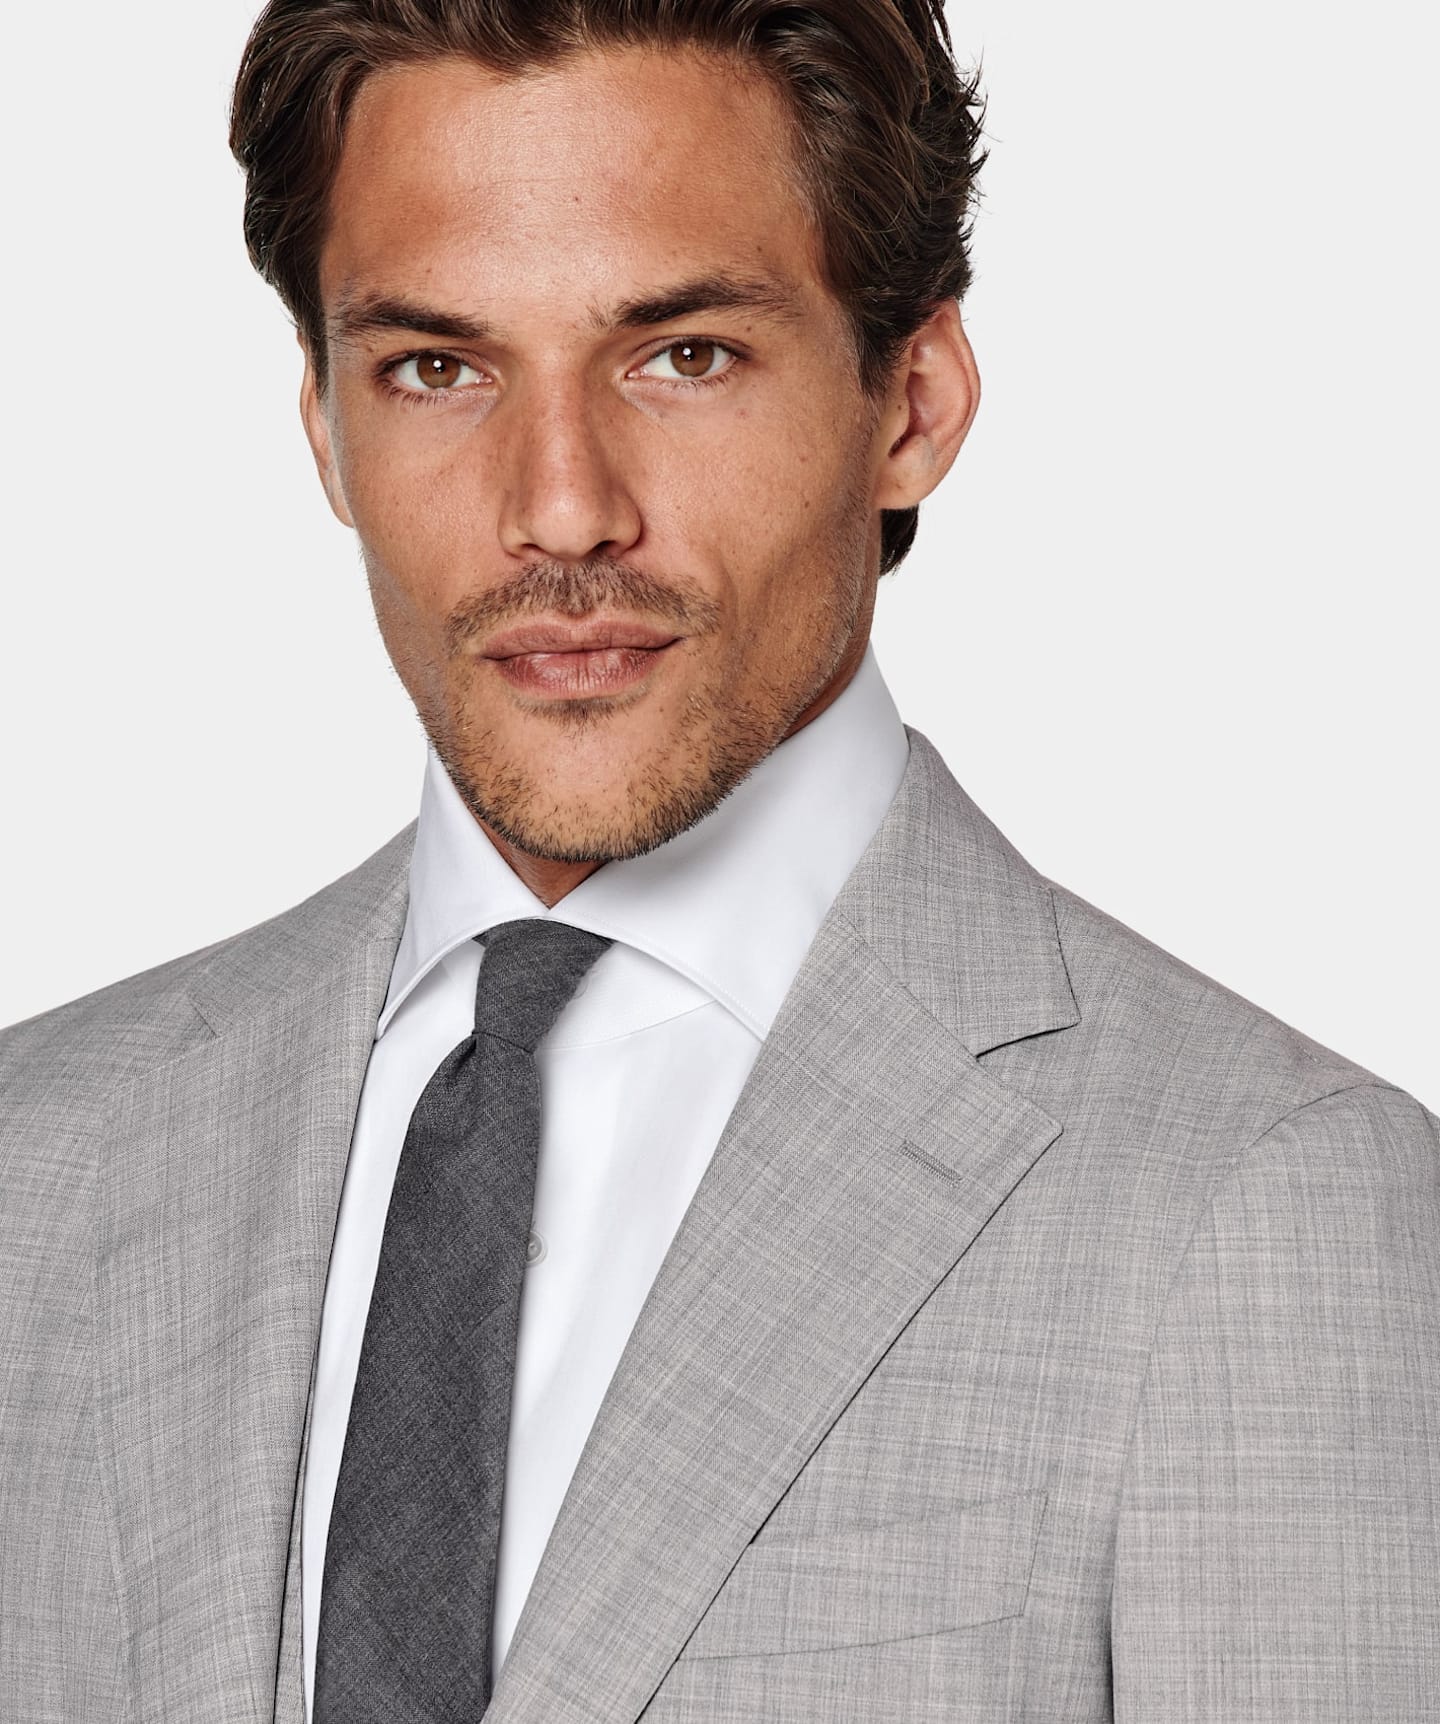 Grey suit jacket styled with white shirt and grey tie